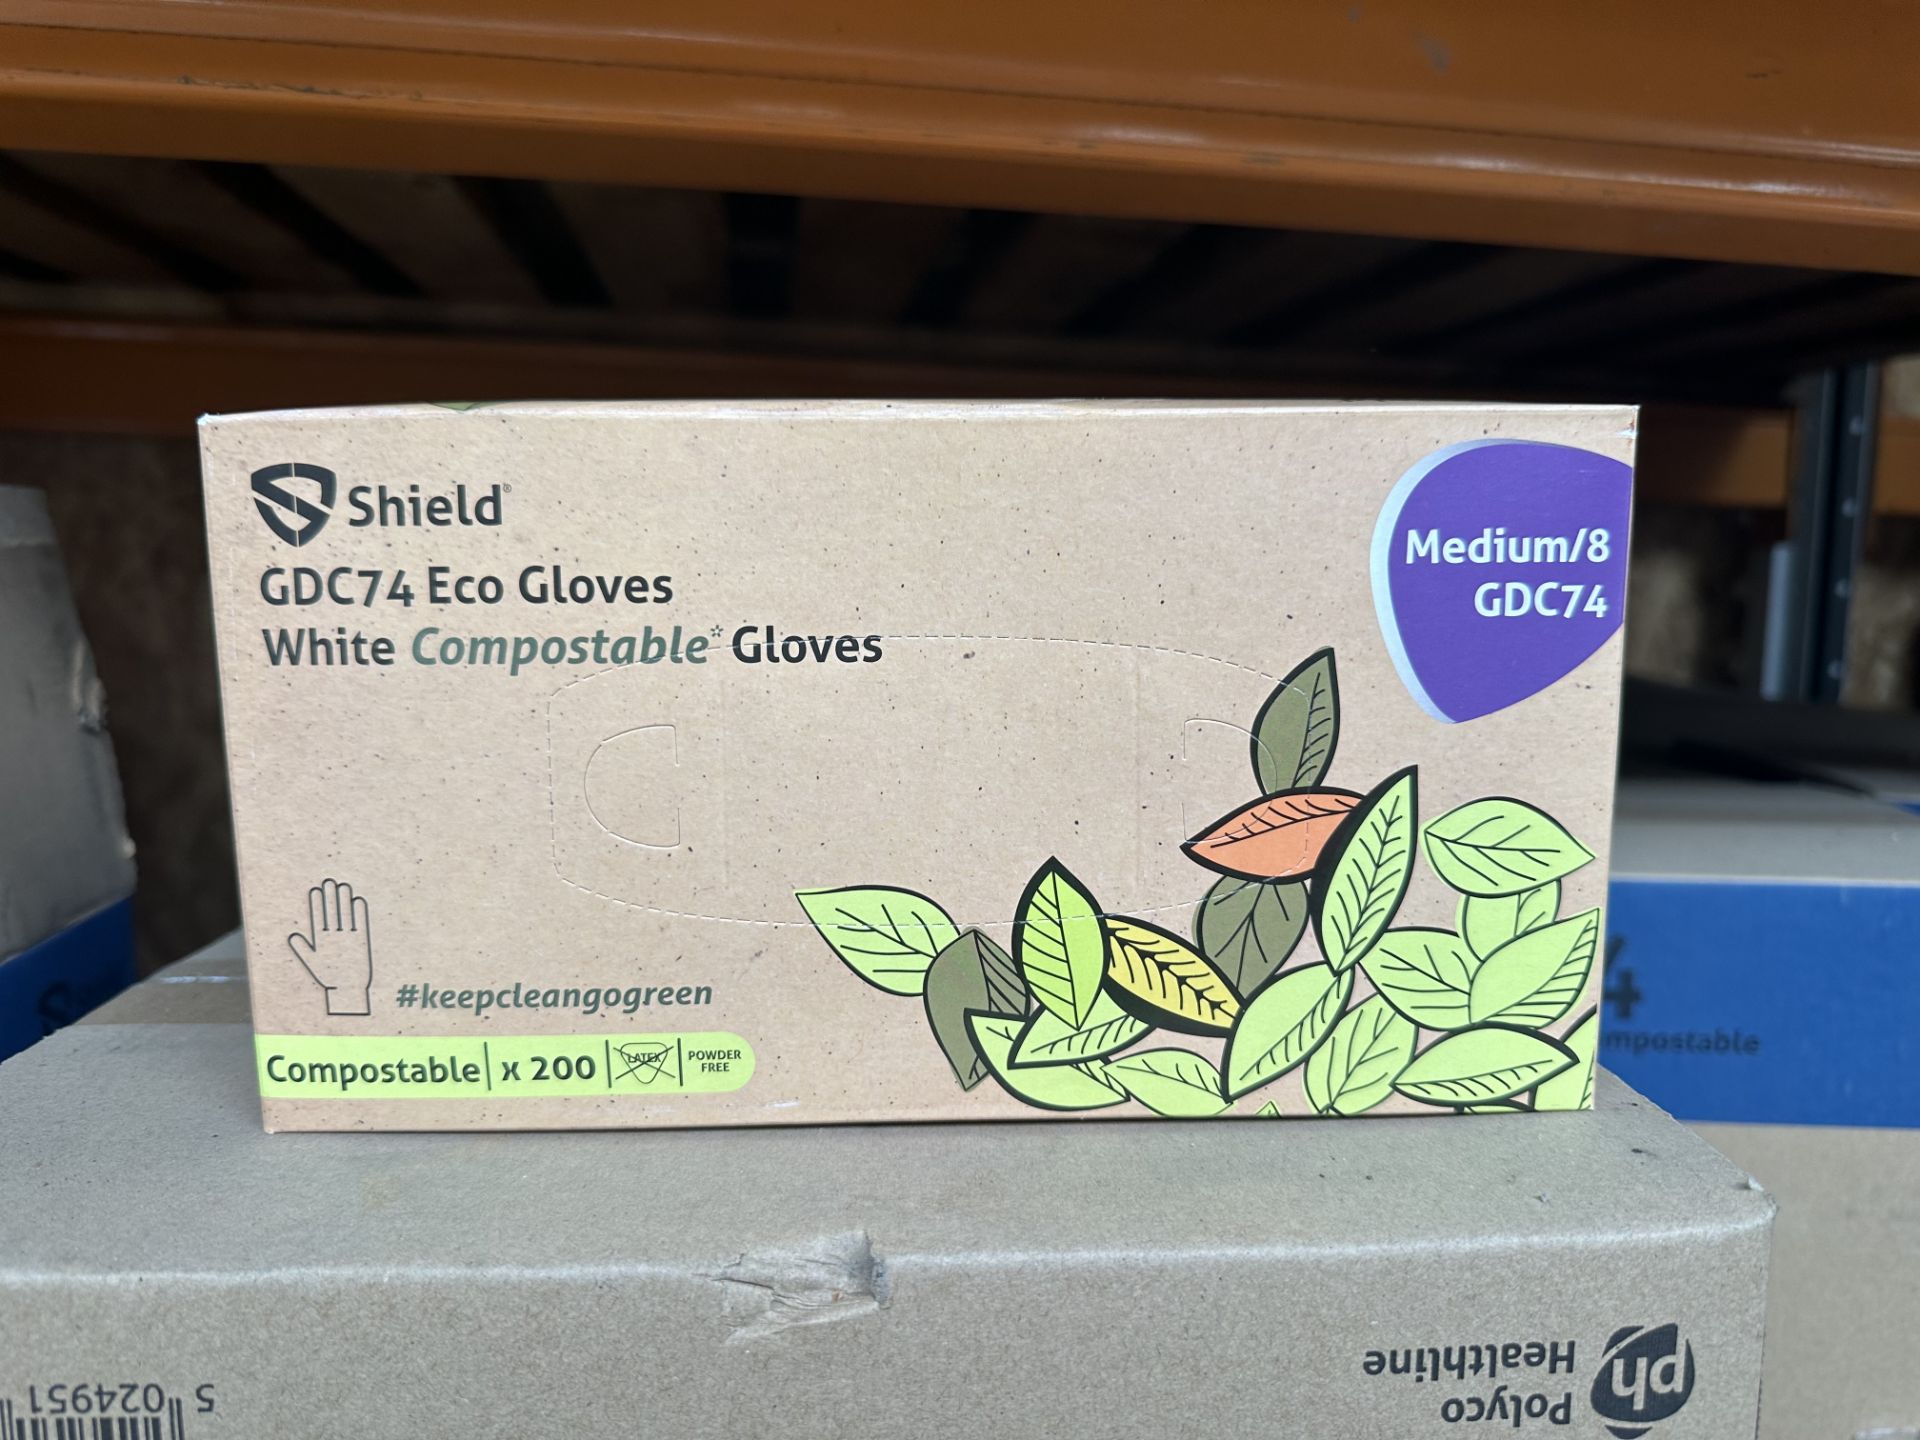 250 BOXES OF 200, SHIELD GDC74 ECO WHITE COMPOSTABLE GLOVES MEDIUM RRP £2500